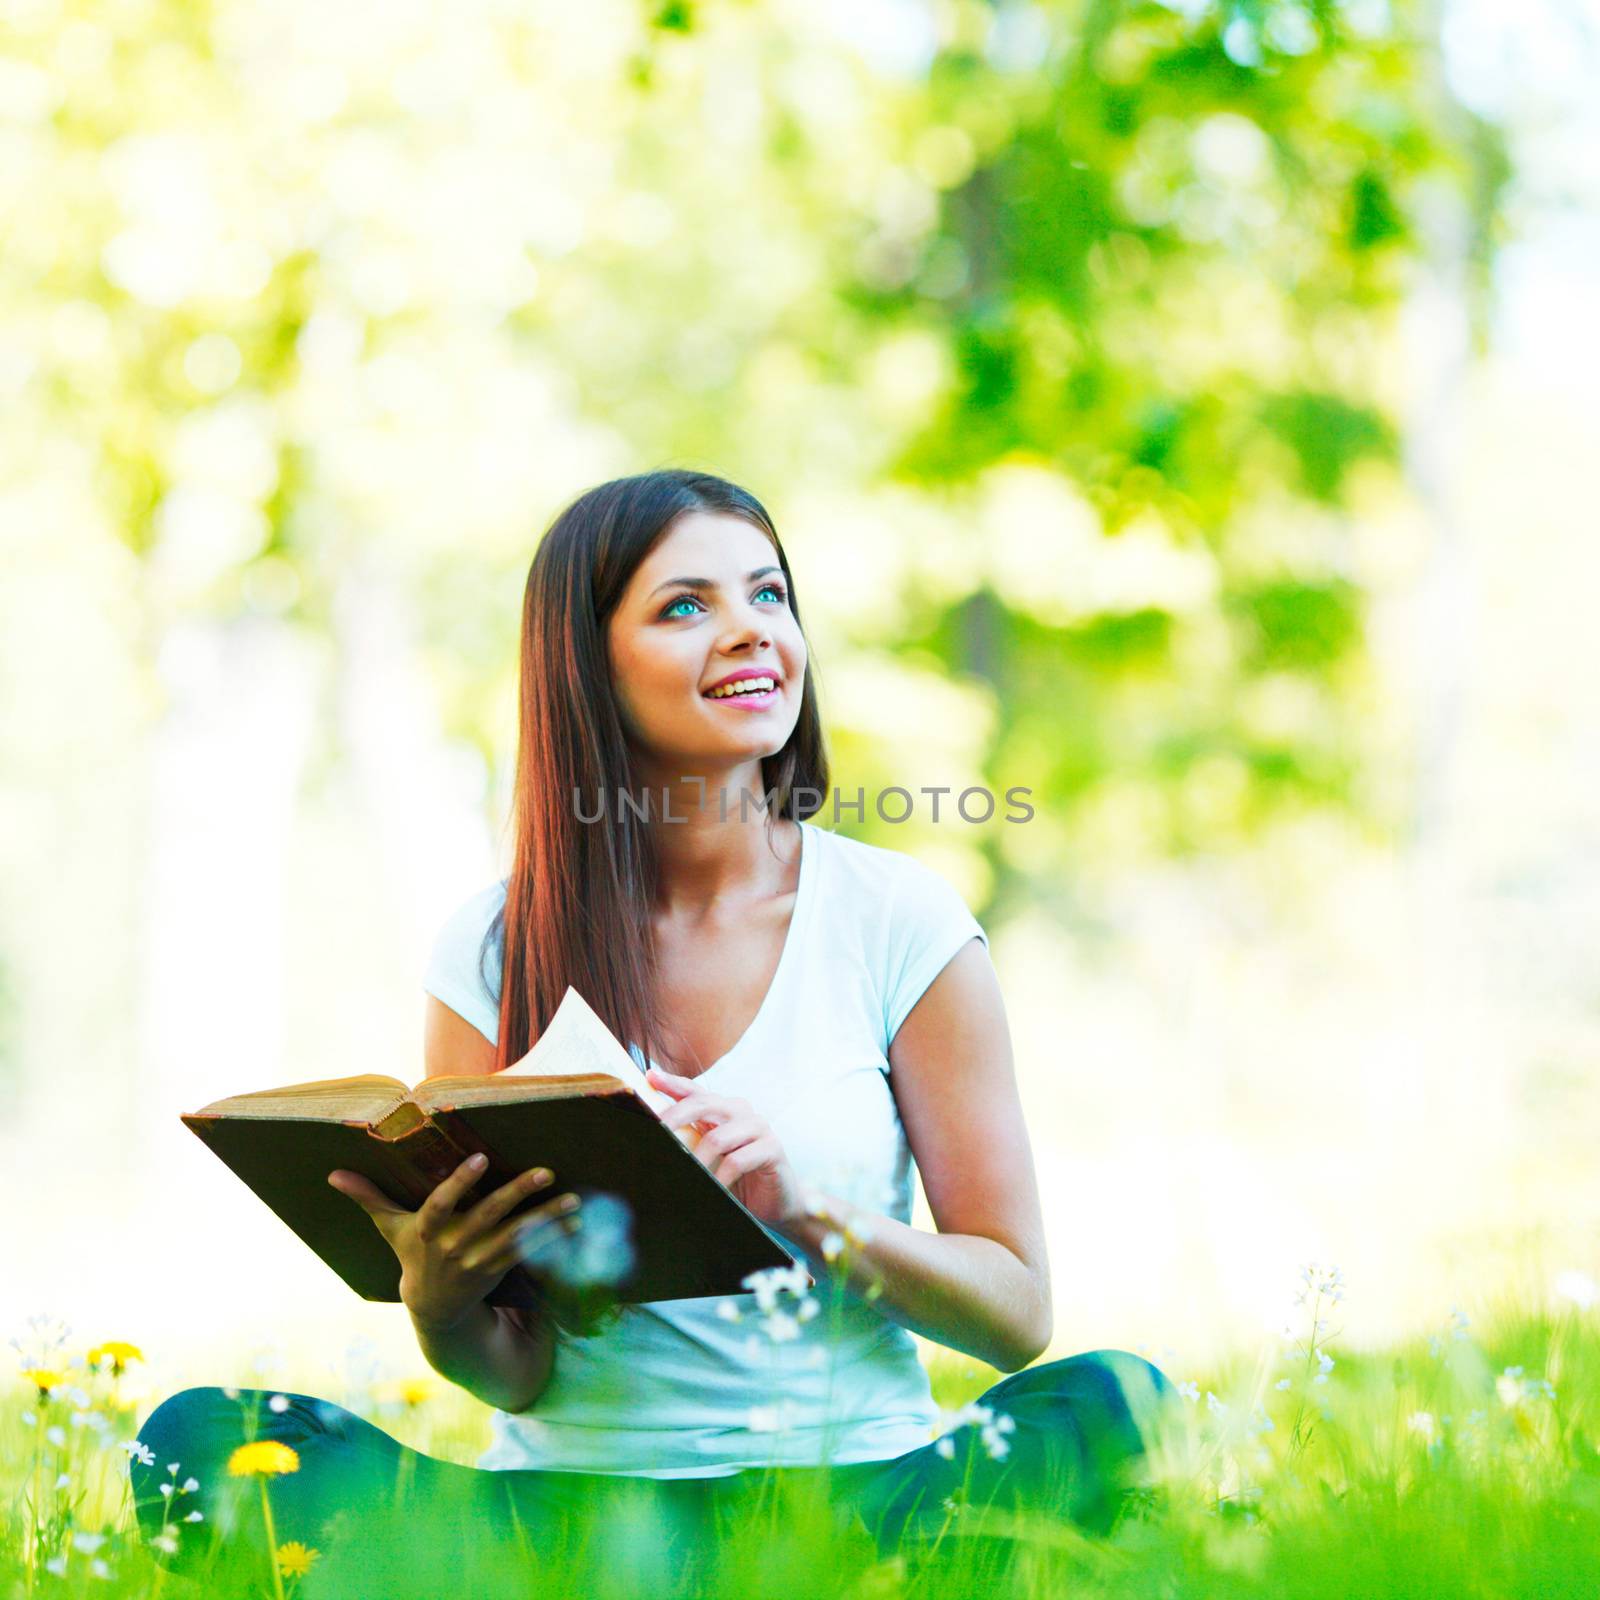 Young beautiful woman with book resting on fresh green grass with flowers